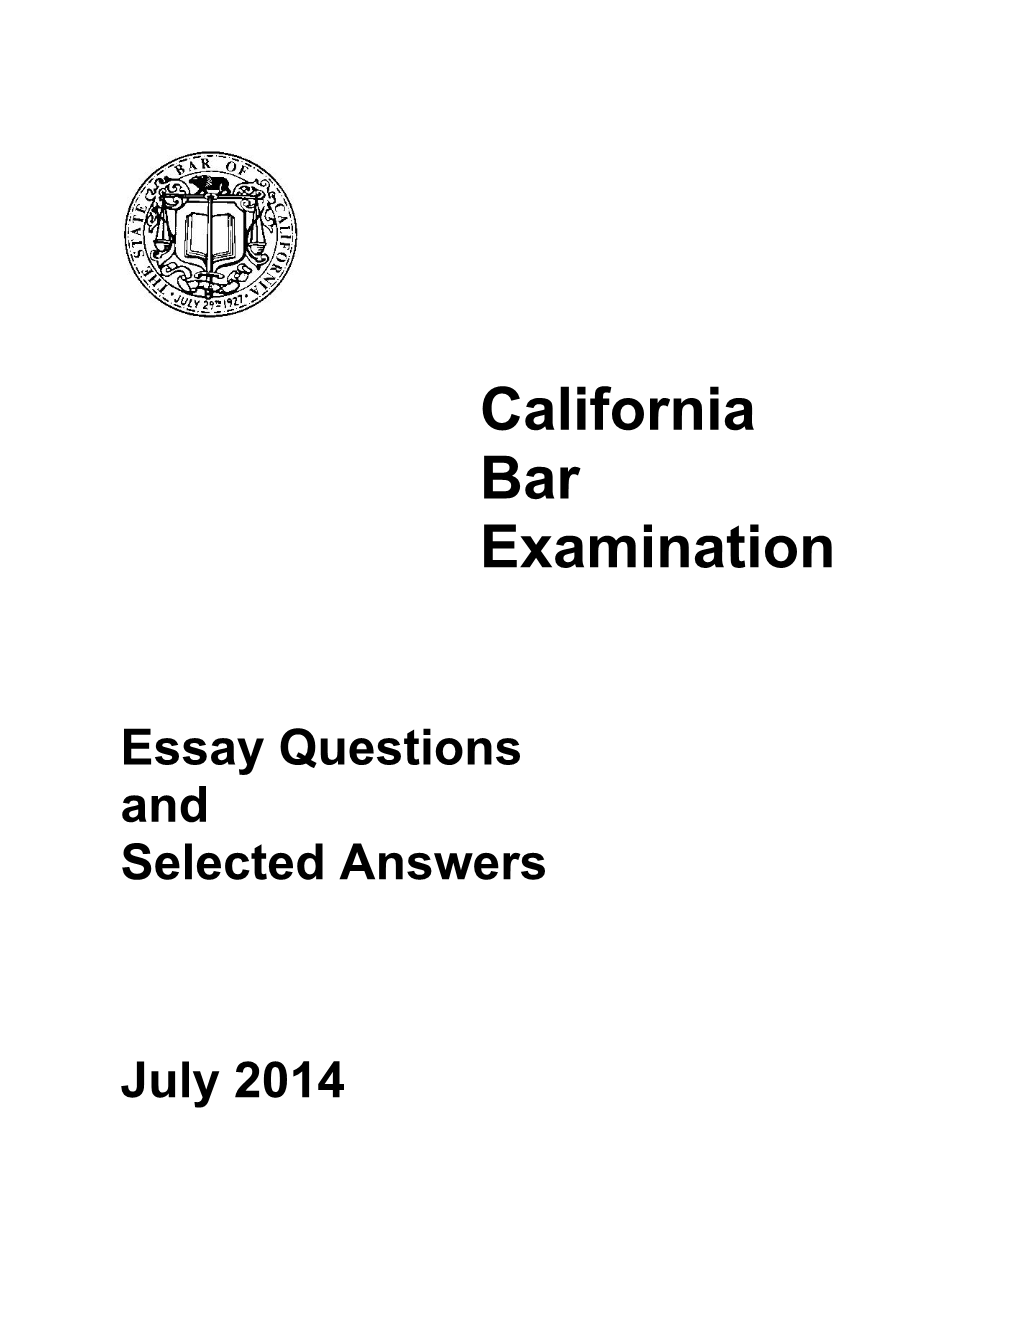 Essay Questions and Selected Answers, July 2014